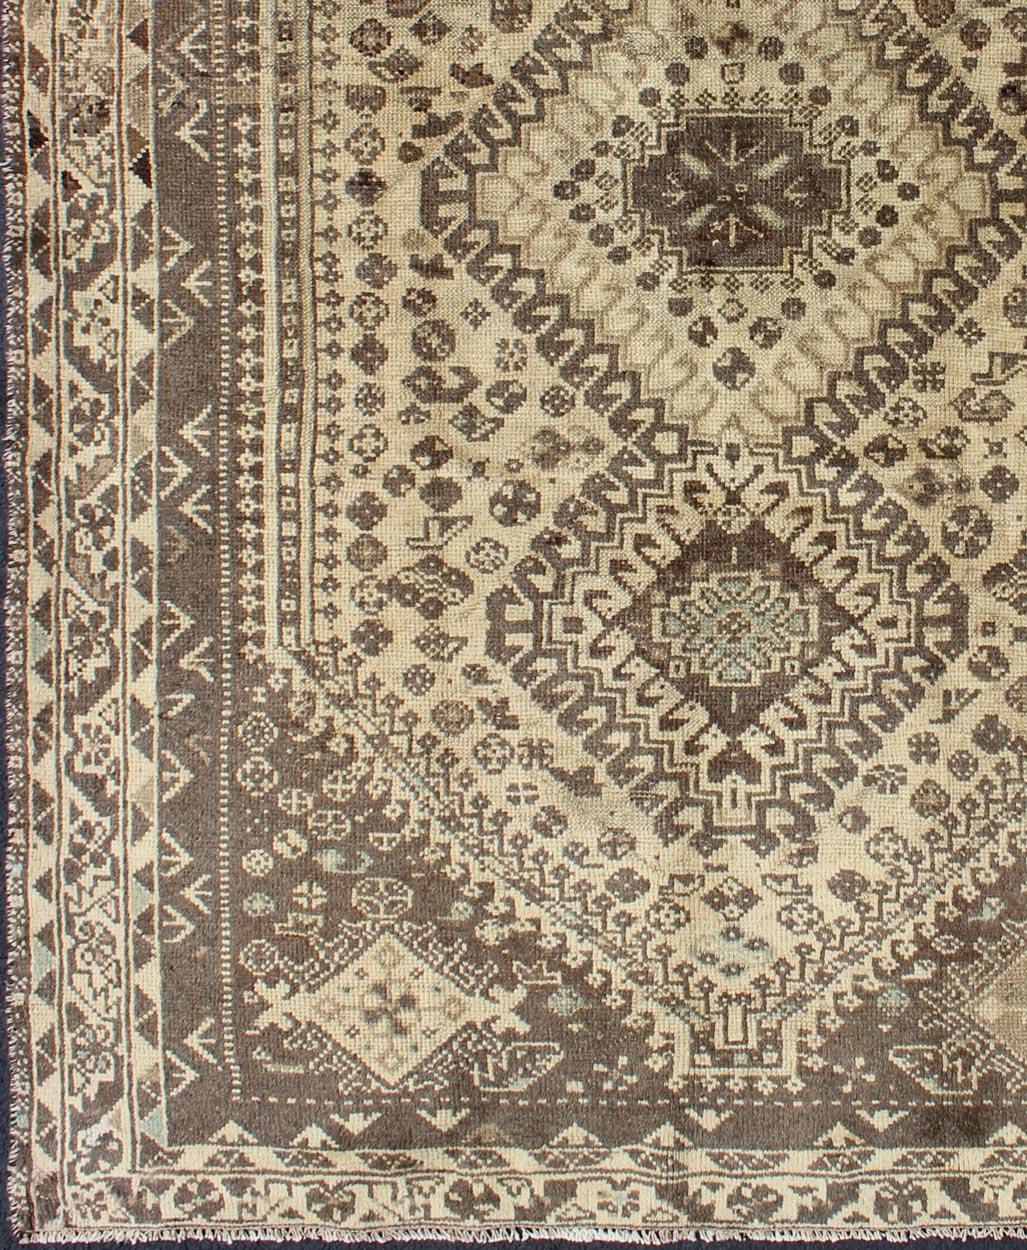 Vintage hand-knotted Persian Shiraz, rug H-1211-40, country of origin / type: Persian / Tribal, circa mid-20th century, 

This vintage Persian rug features a central medallion design in a neutral color palette with brown outlines. The geometric,